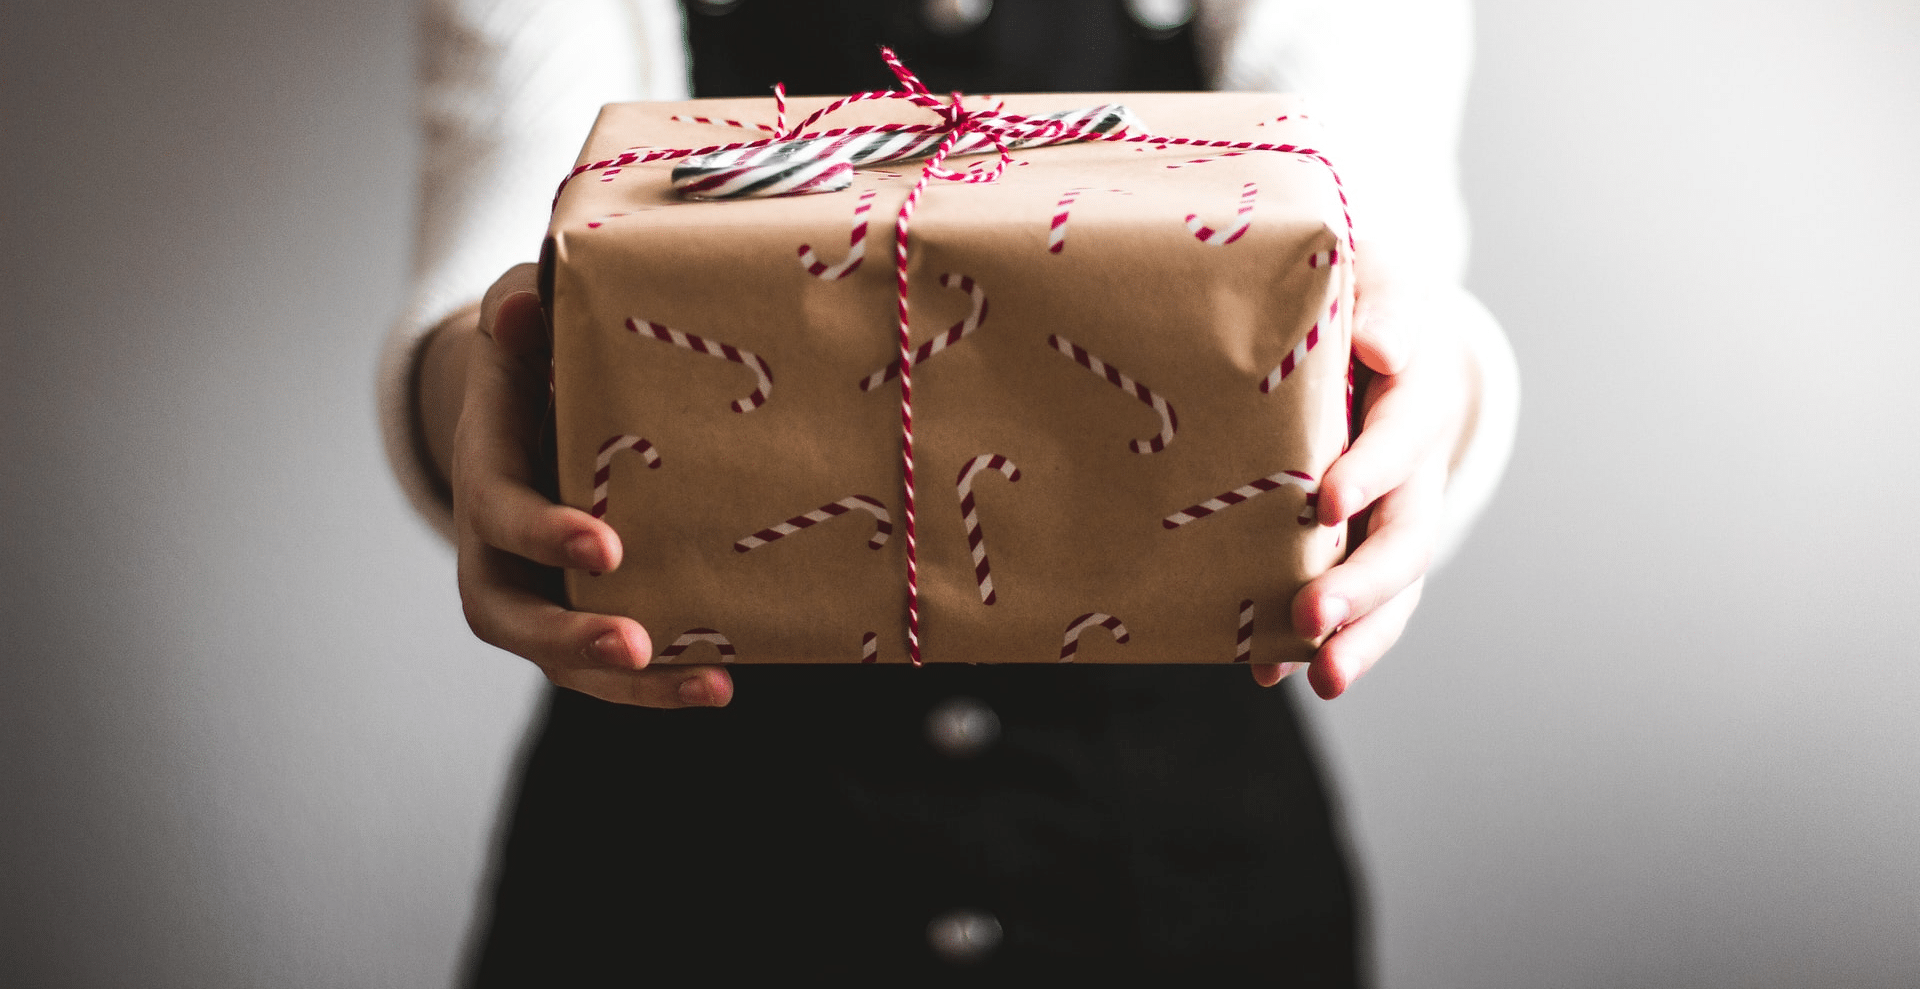 Gifting programs can help drive loyalty between customers and brands.